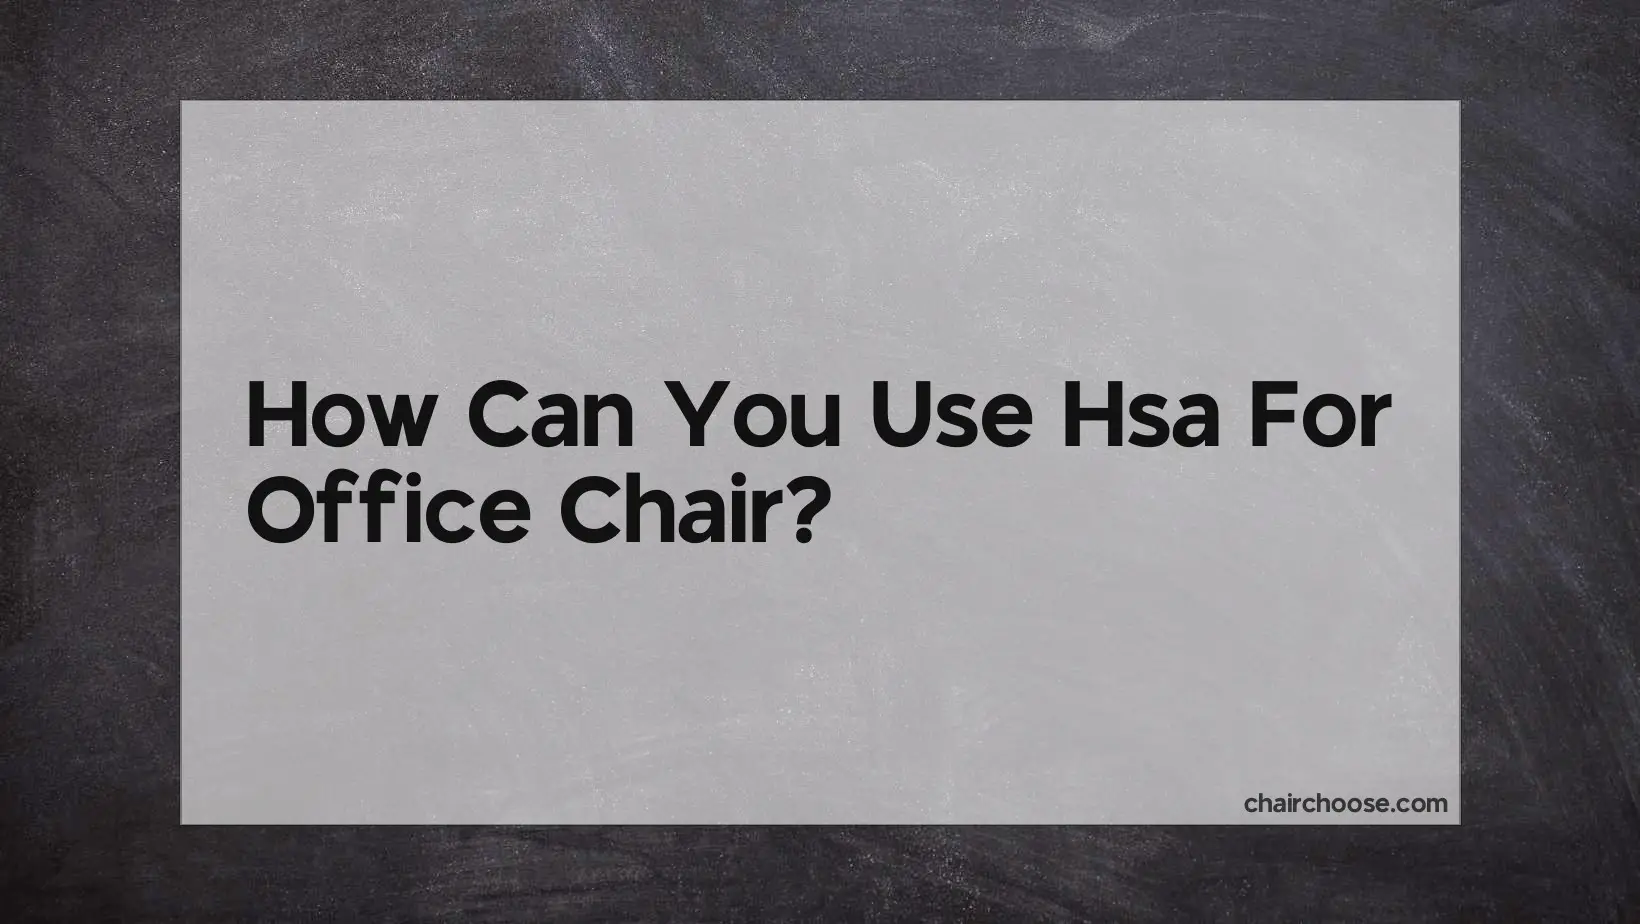 How Can You Use Hsa For Office Chair?